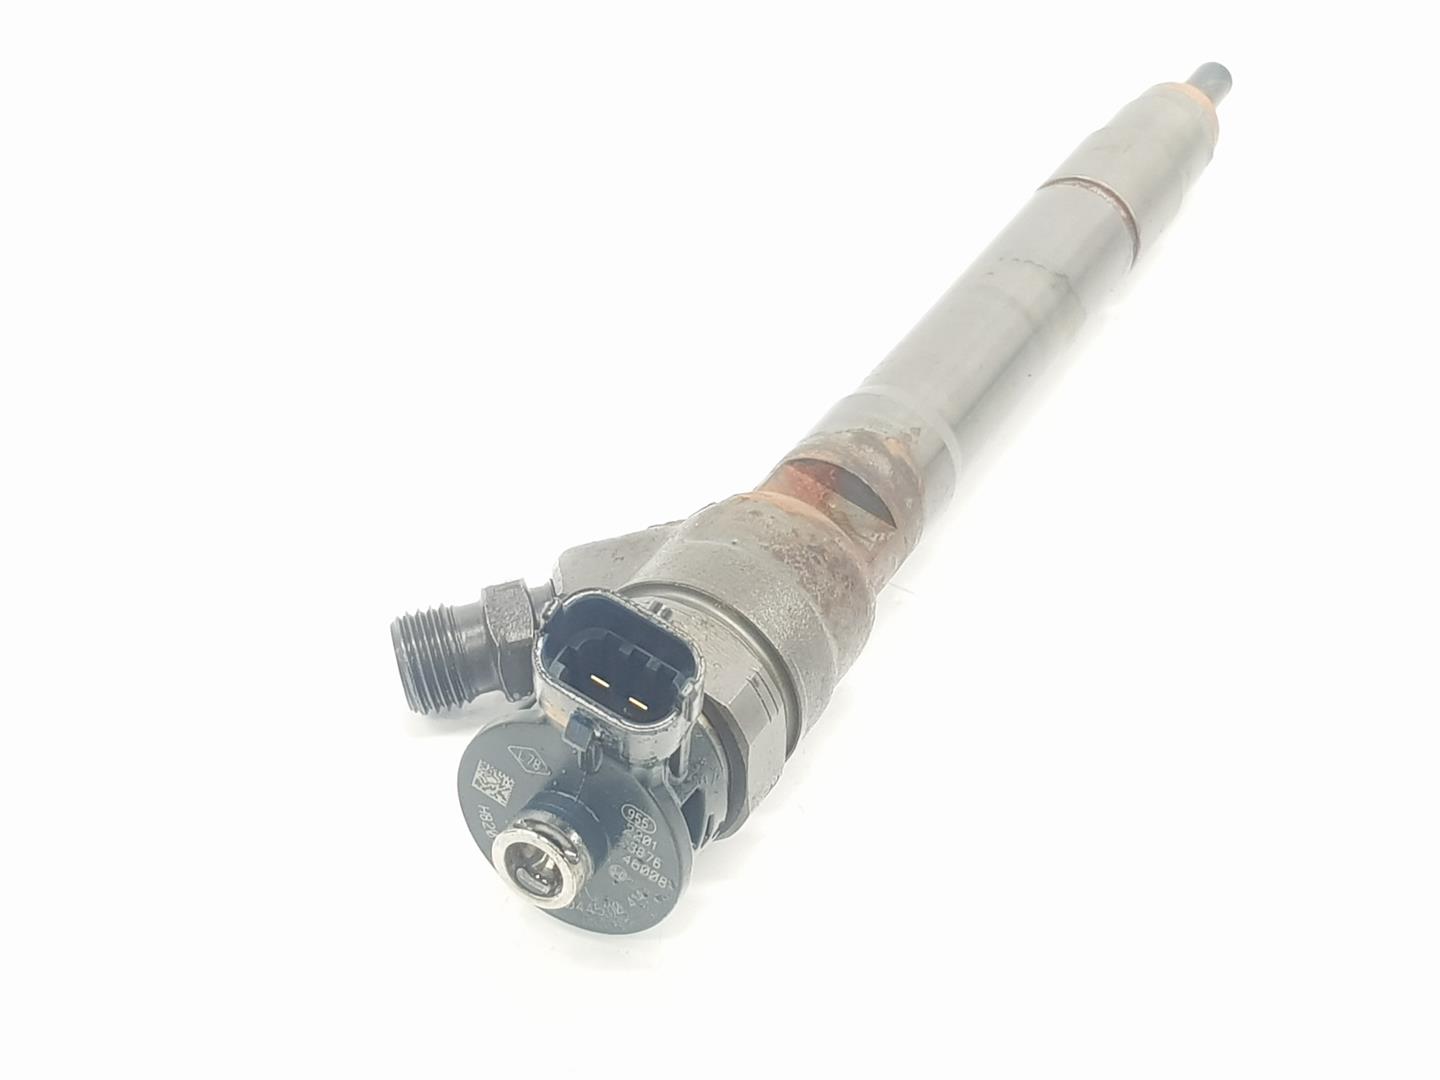 RENAULT Trafic 2 generation (2001-2015) Fuel Injector 166105302R, 166105302R, 1111AA 24224233